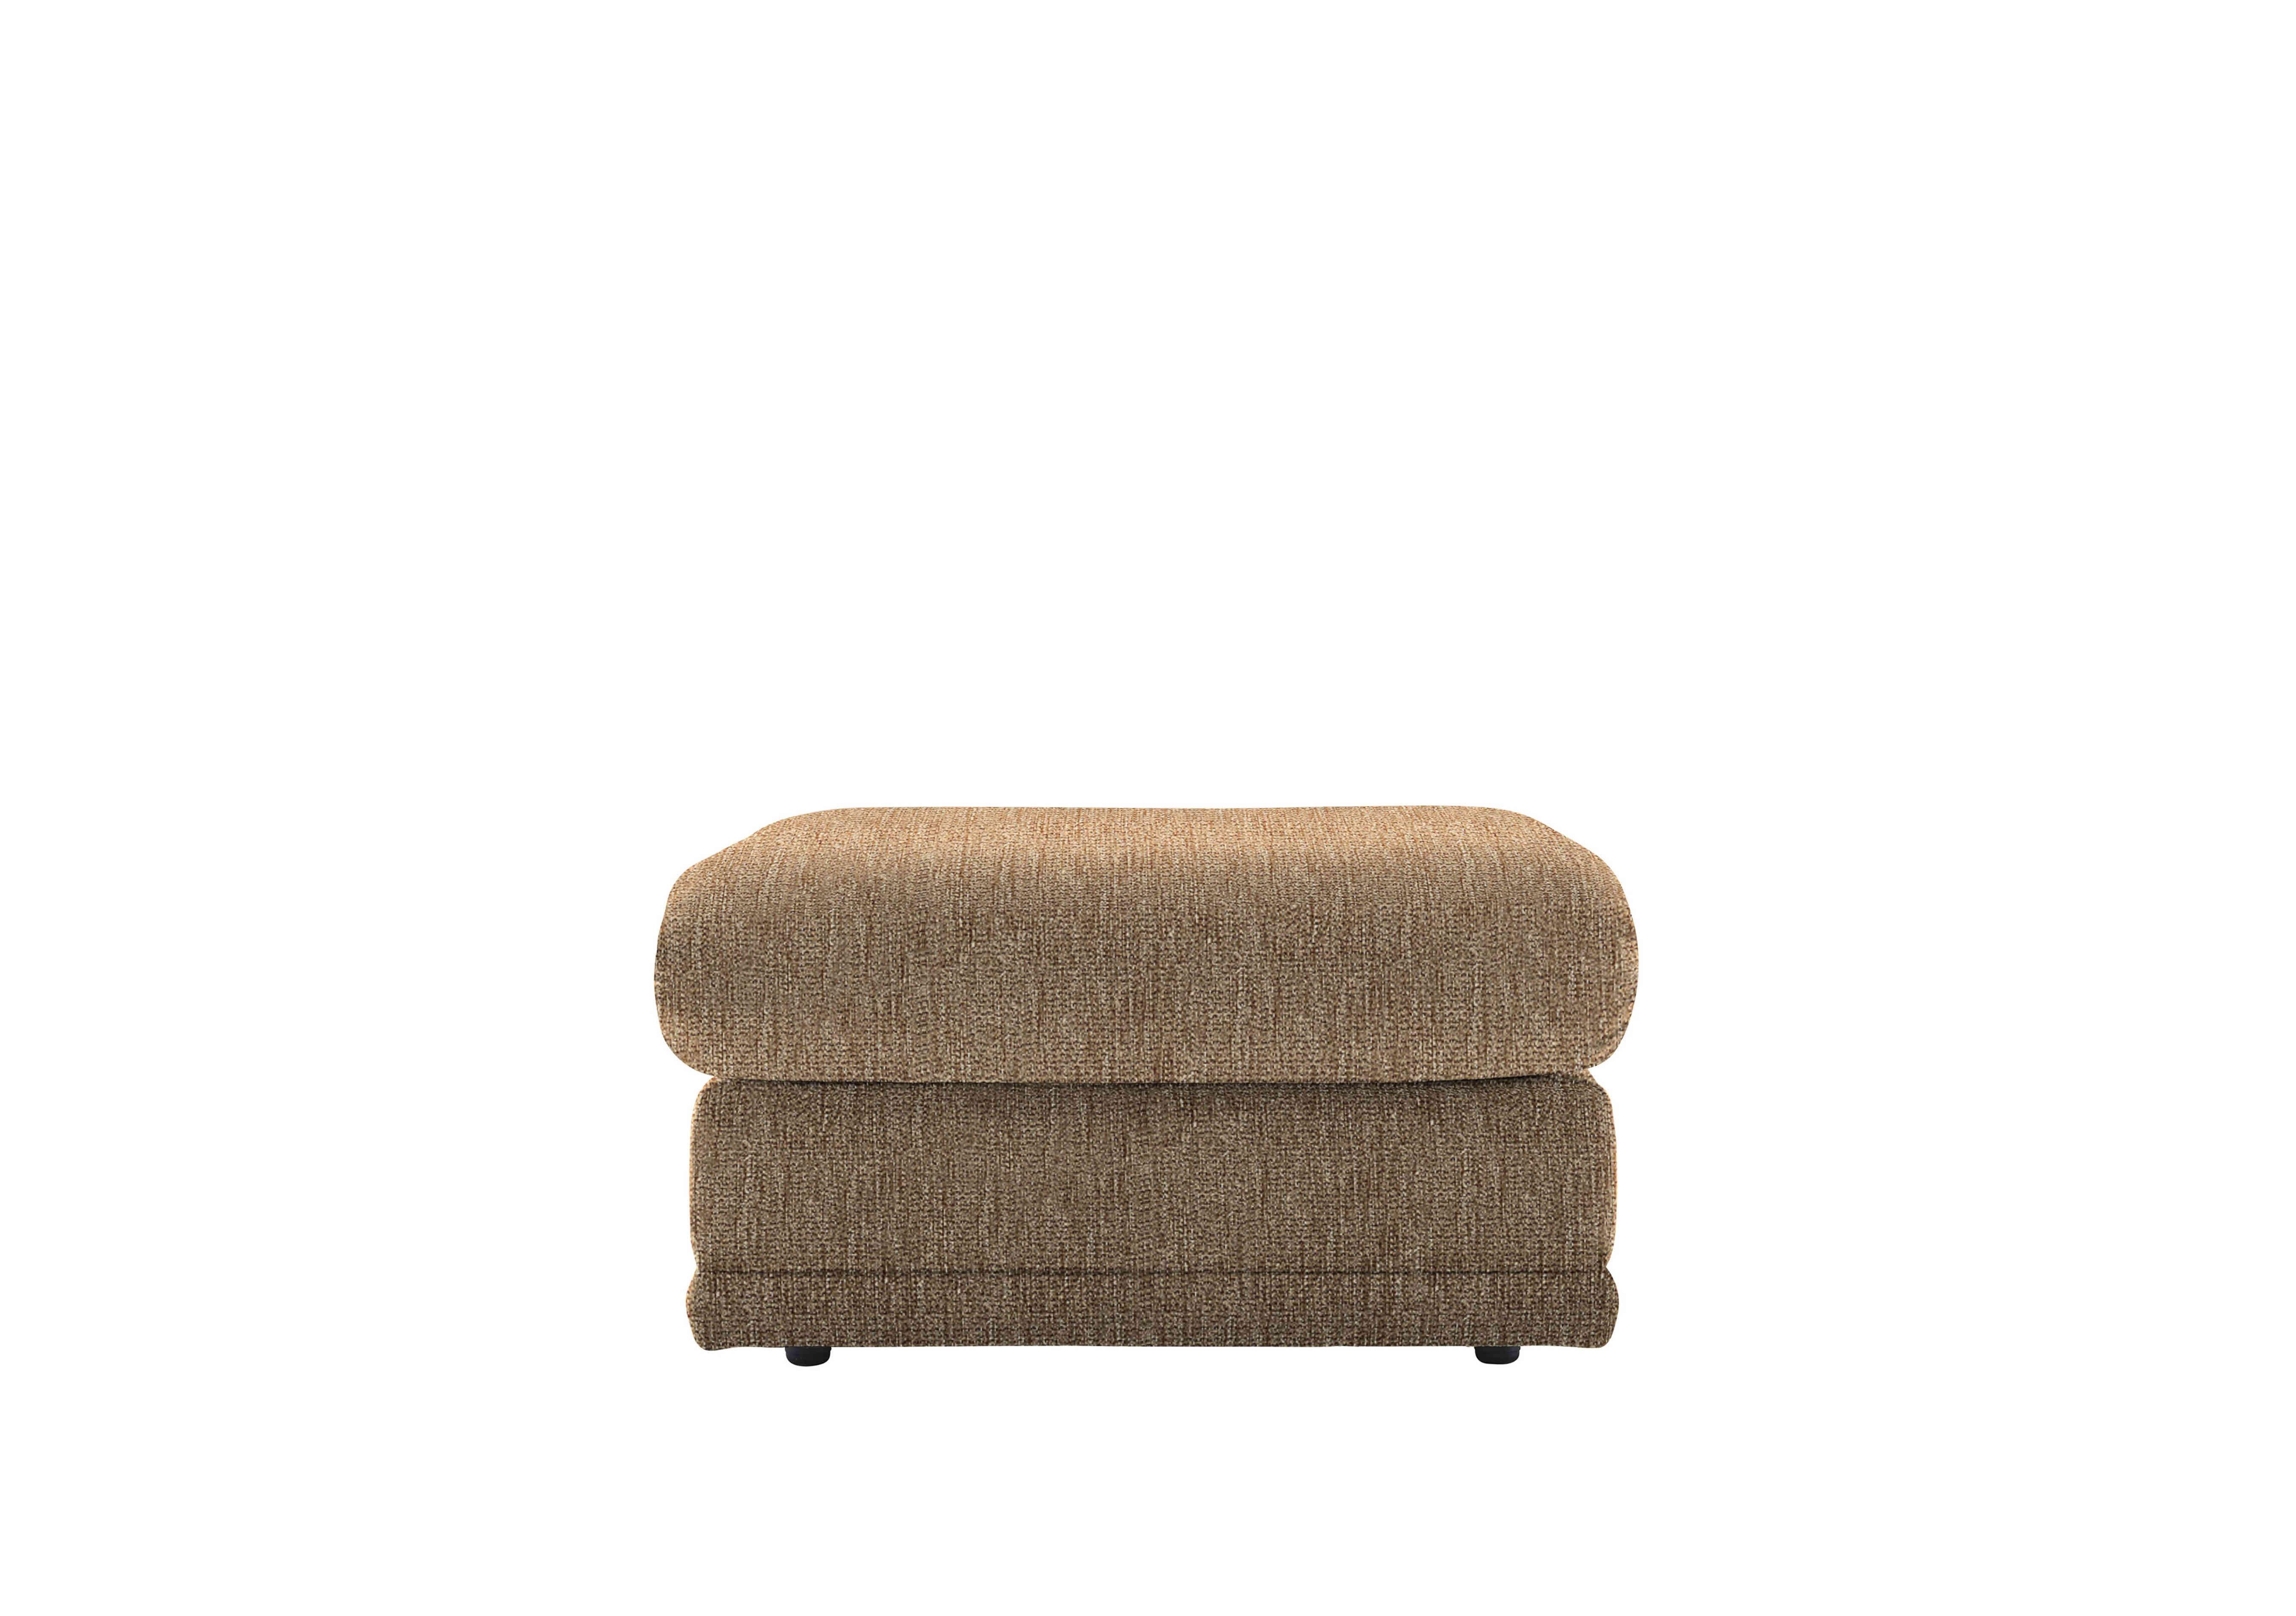 Malvern Fabric Storage Footstool in A070 Boucle Cocoa on Furniture Village